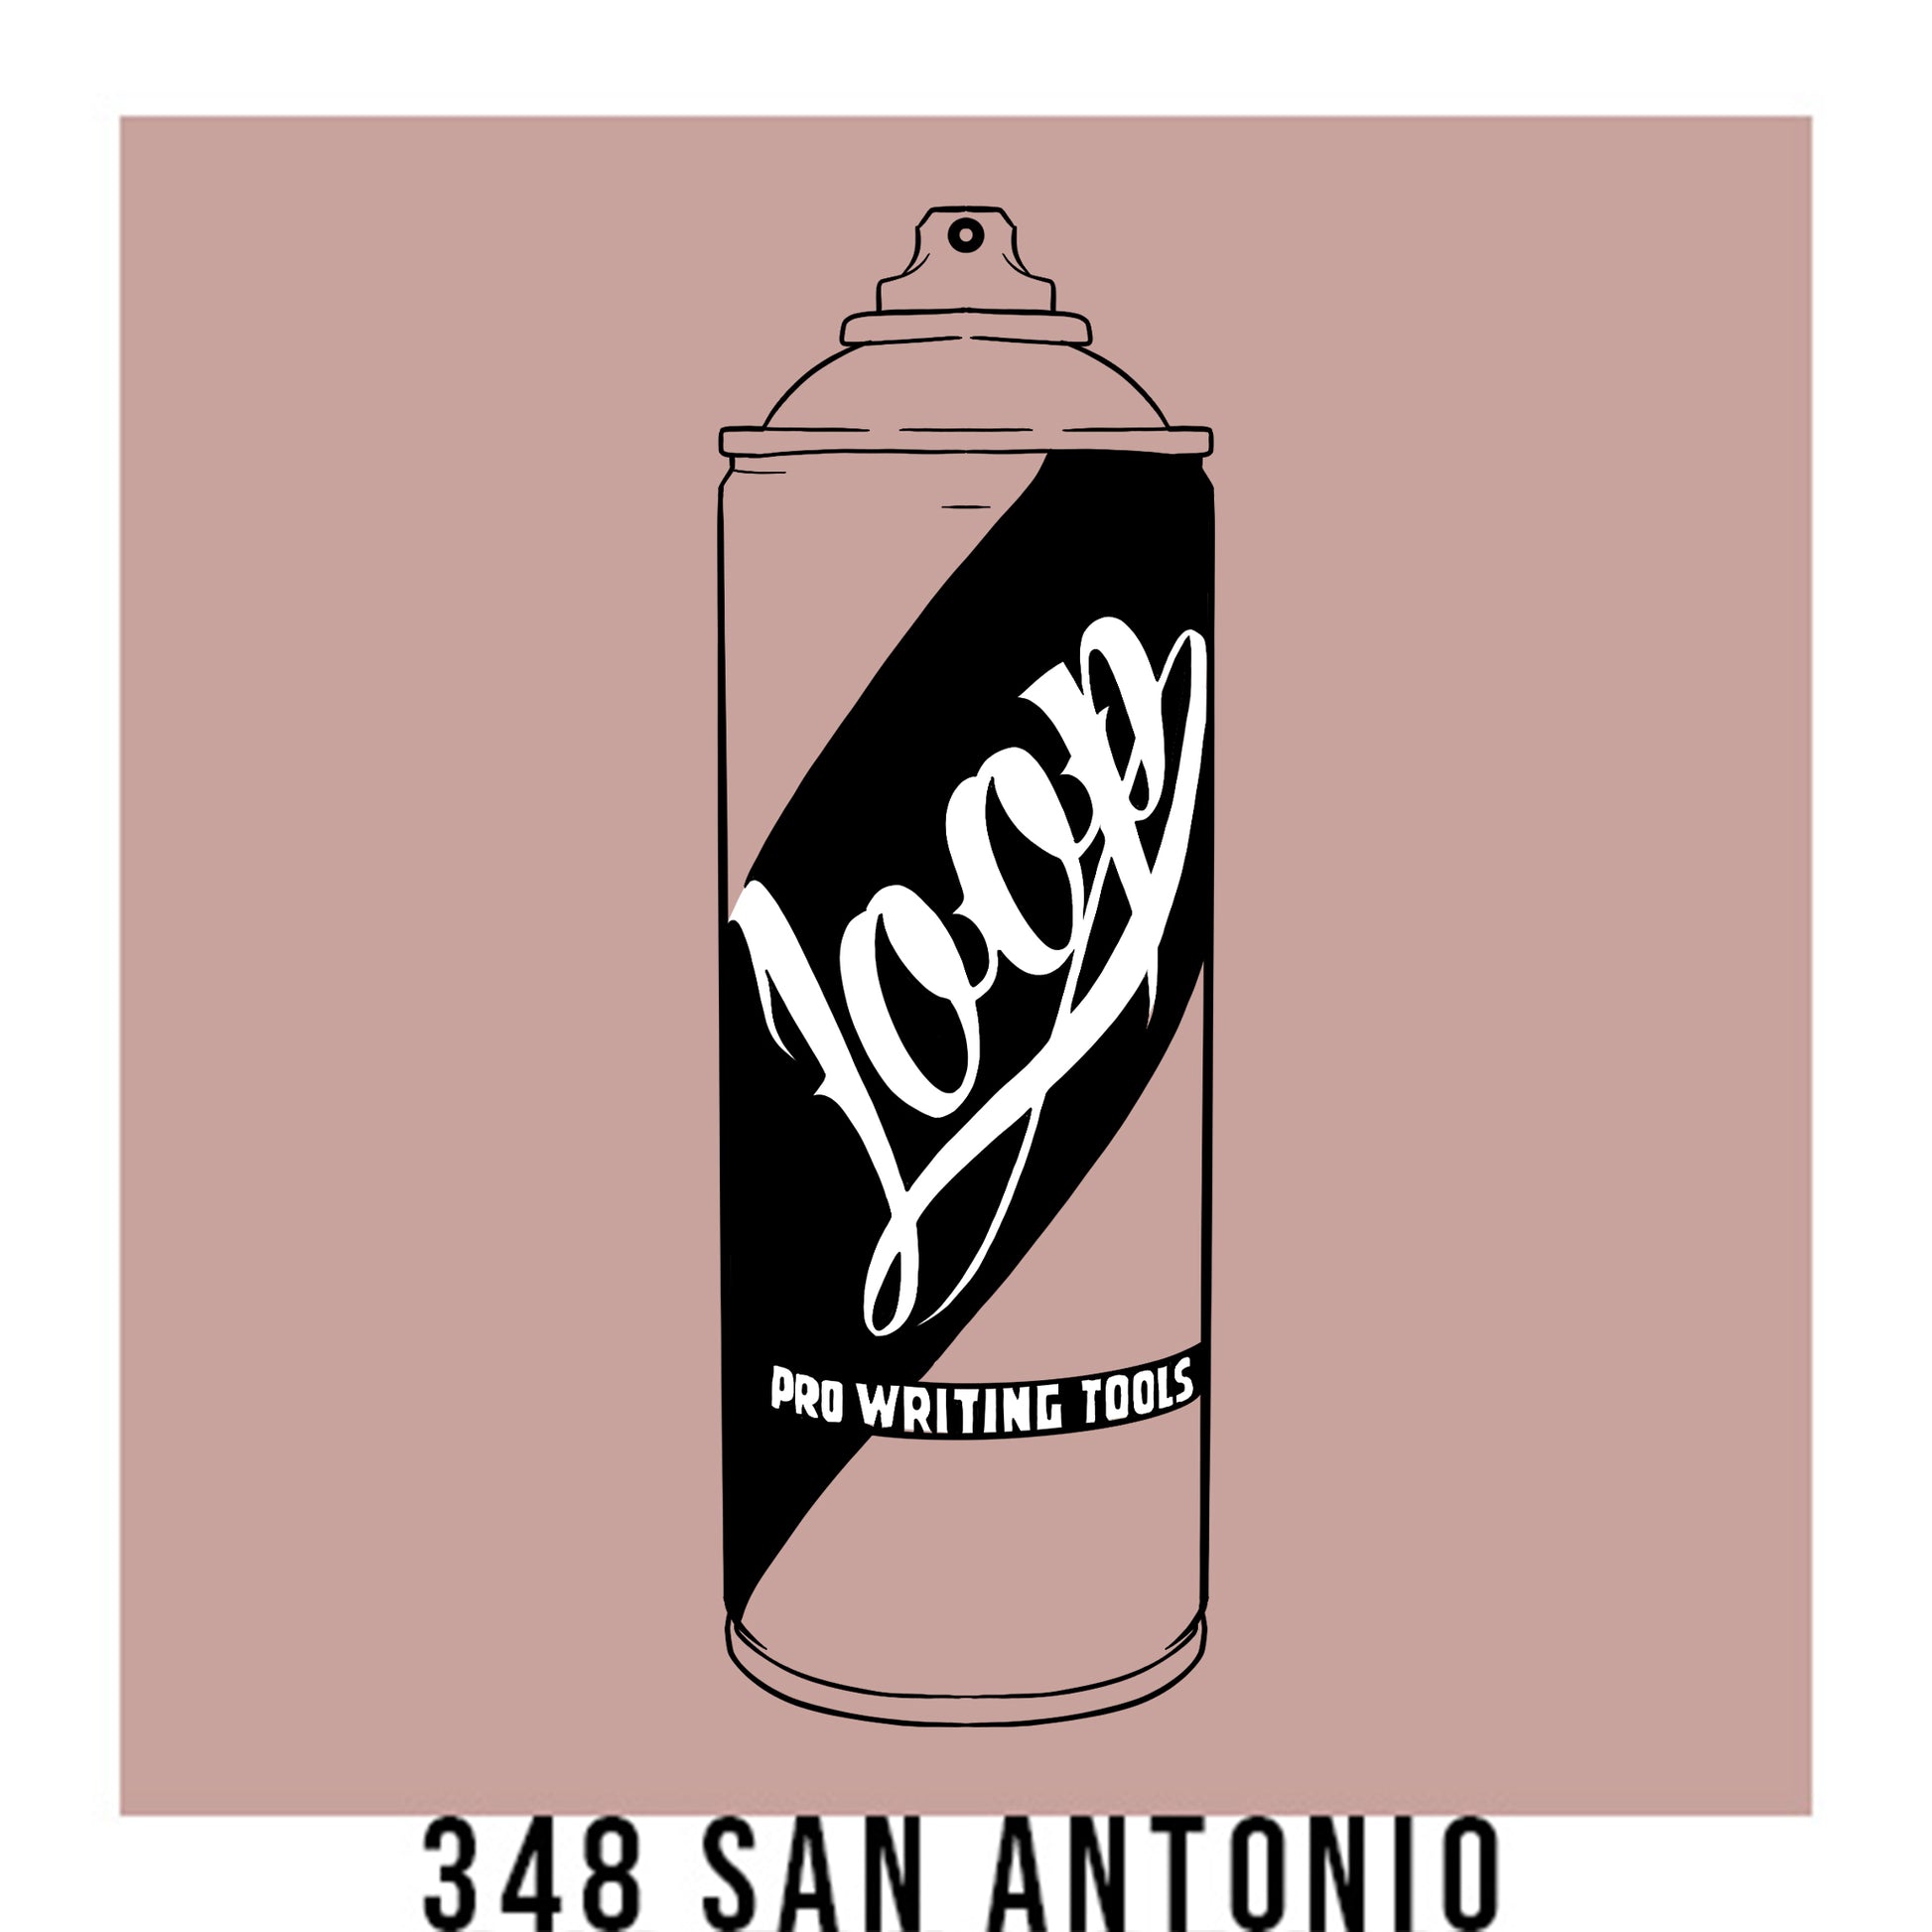 A black outline drawing of a rose blush spray paint can with the word "Loop" written on the face in script. The background is a color swatch of the same rose blush with a white border with the words "348 San Antonio" at the bottom.